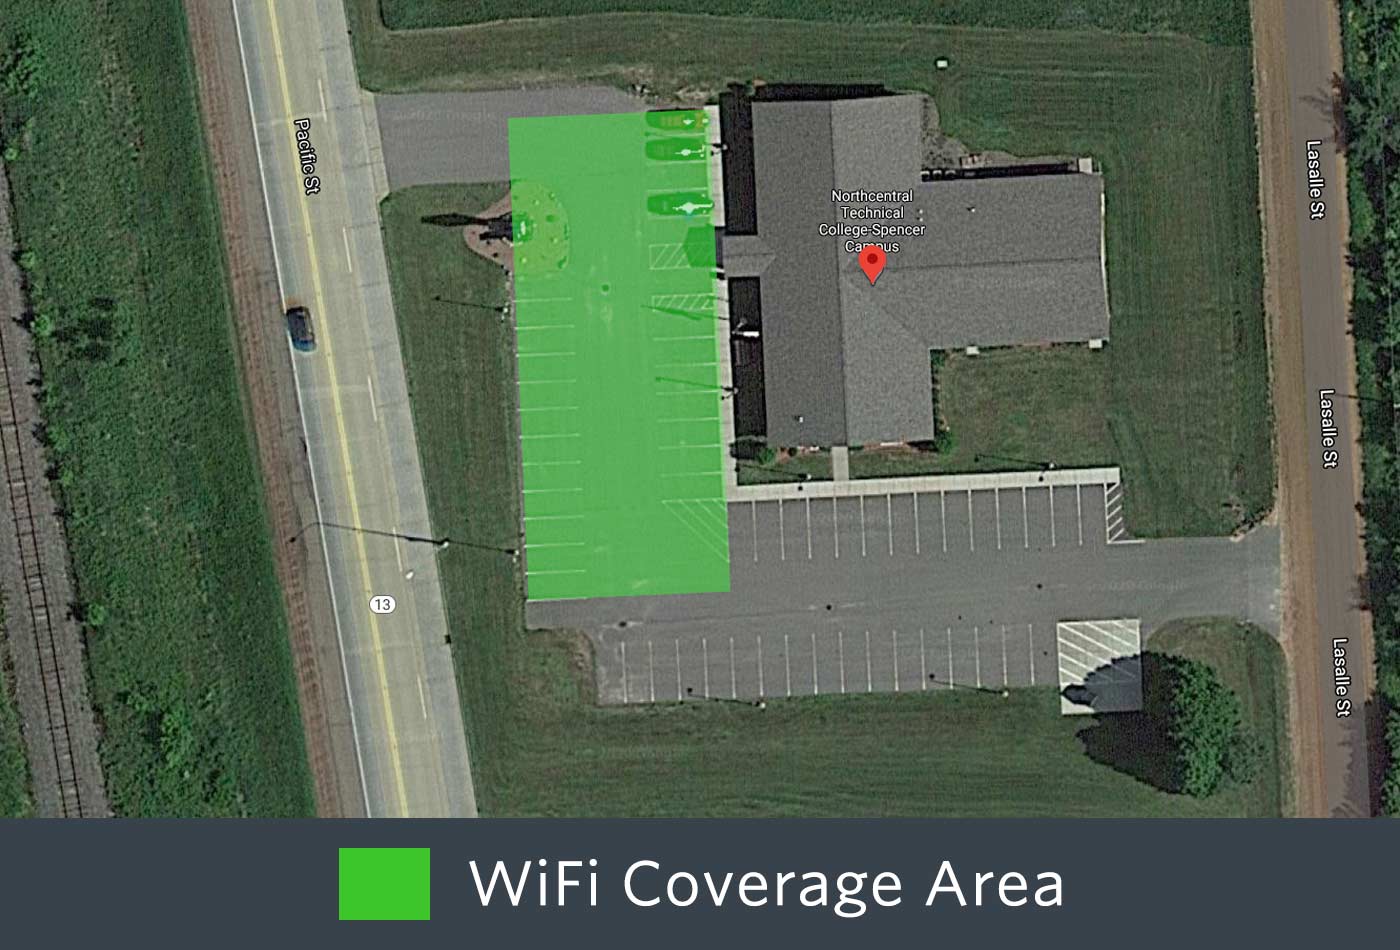 Outdoor WiFi coverage of the front of the Spencer Campus